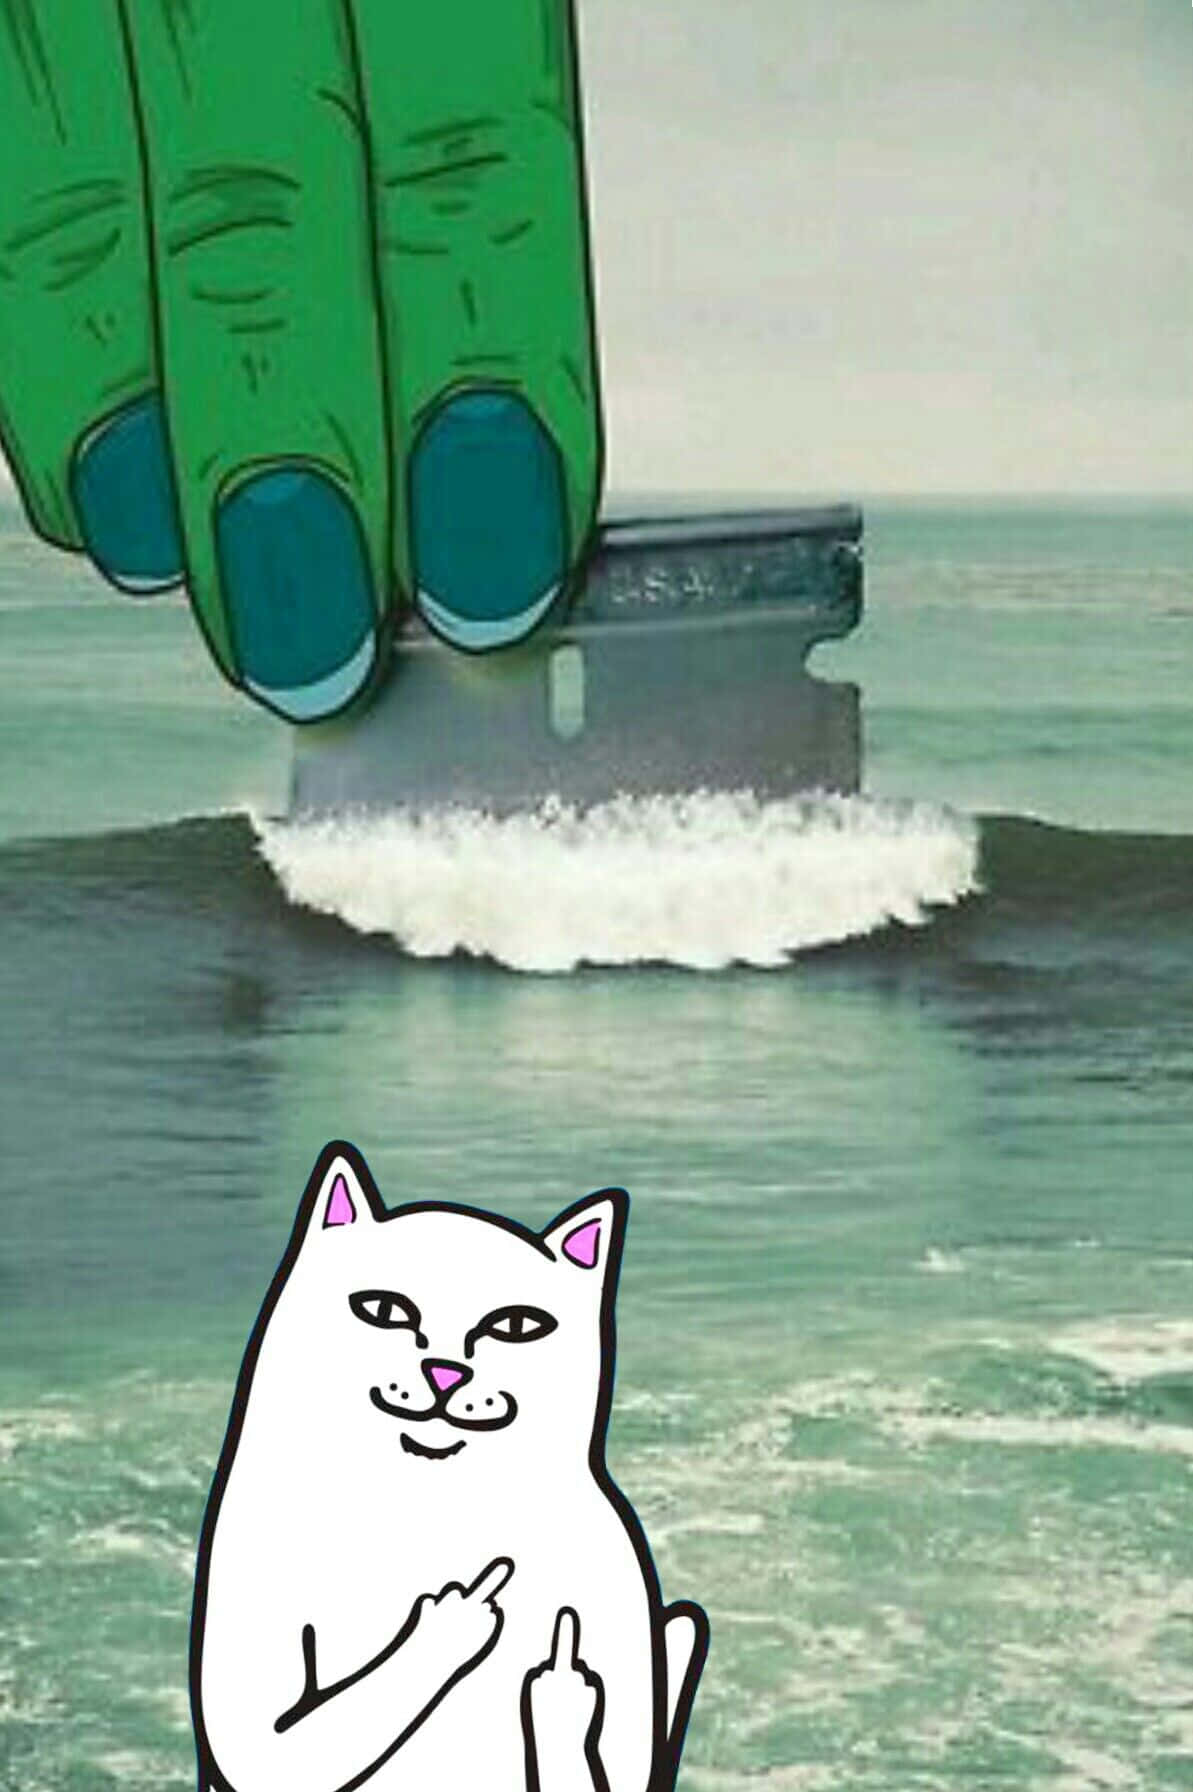 Who else but RIPNDIP is always here to brighten your day? Wallpaper